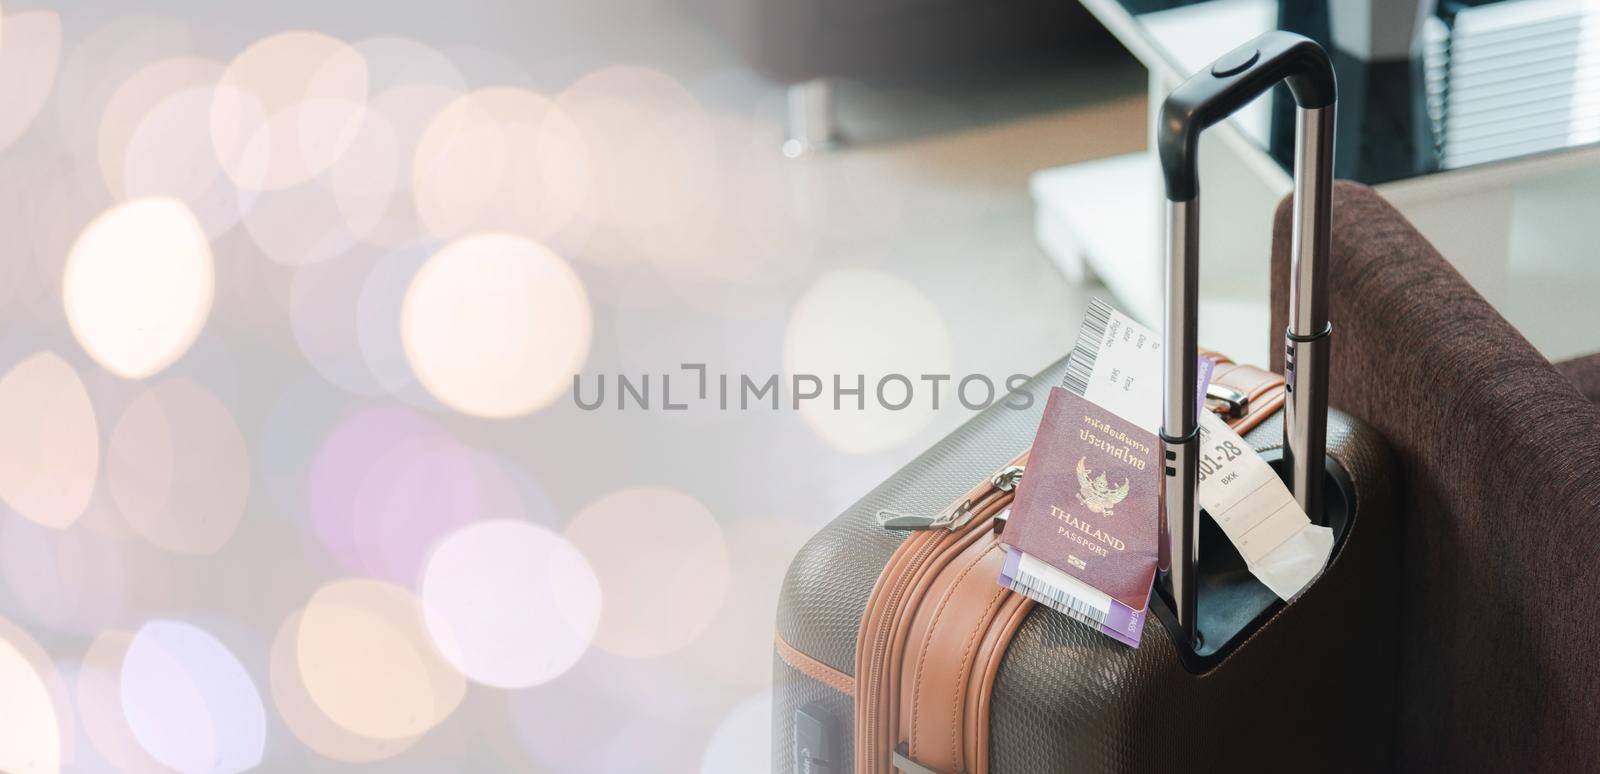 Close up Thailand passport on baggage luggage of tourist in the airport, documentation boarding pass ticket on travel suitcase pocket, Travel holiday concept